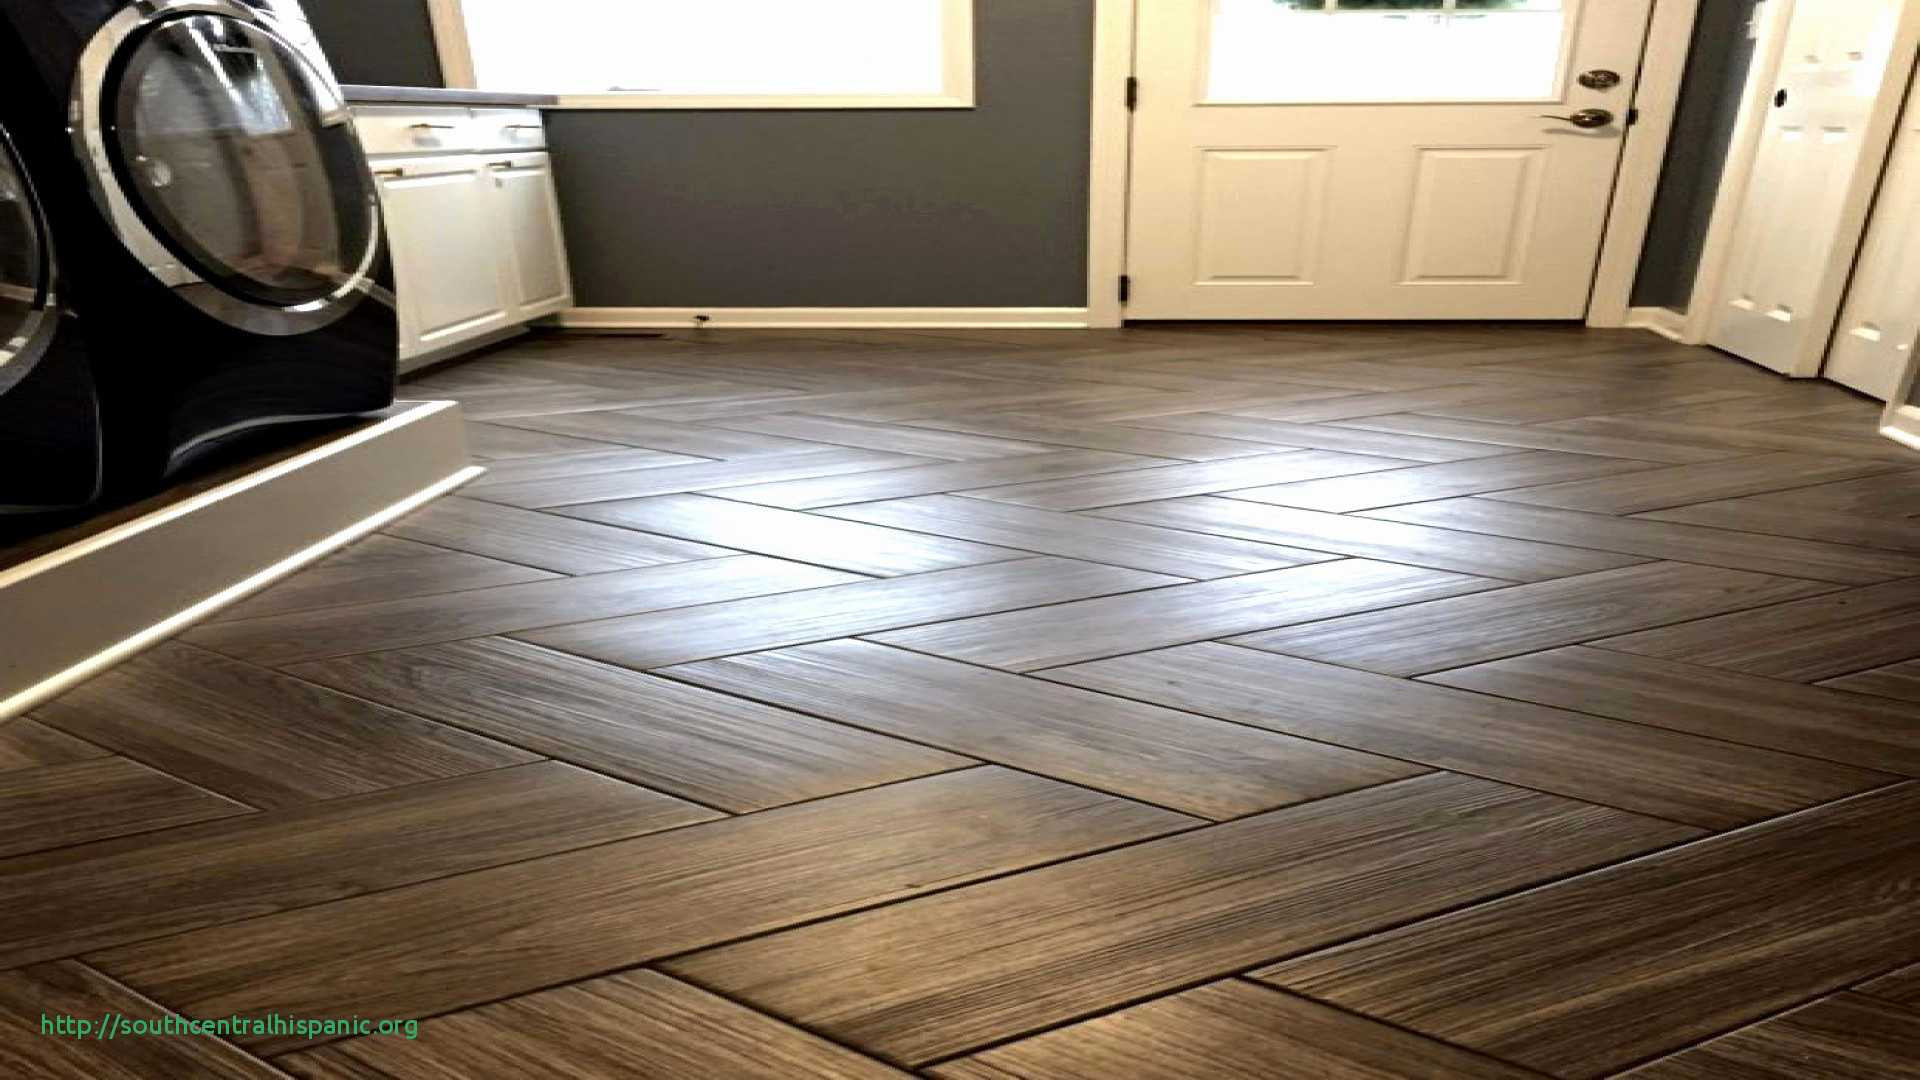 How to Install Floating Engineered Hardwood Flooring Of 18 Unique Installing Hardwood Floors Yourself Ideas Blog with Regard to Installing Engineered Hardwood Over Particle Board Kitchen Floor Tiles Home Depot Elegant S Media Cache Ak0 Pinimg 736x 43 0d 97 Best